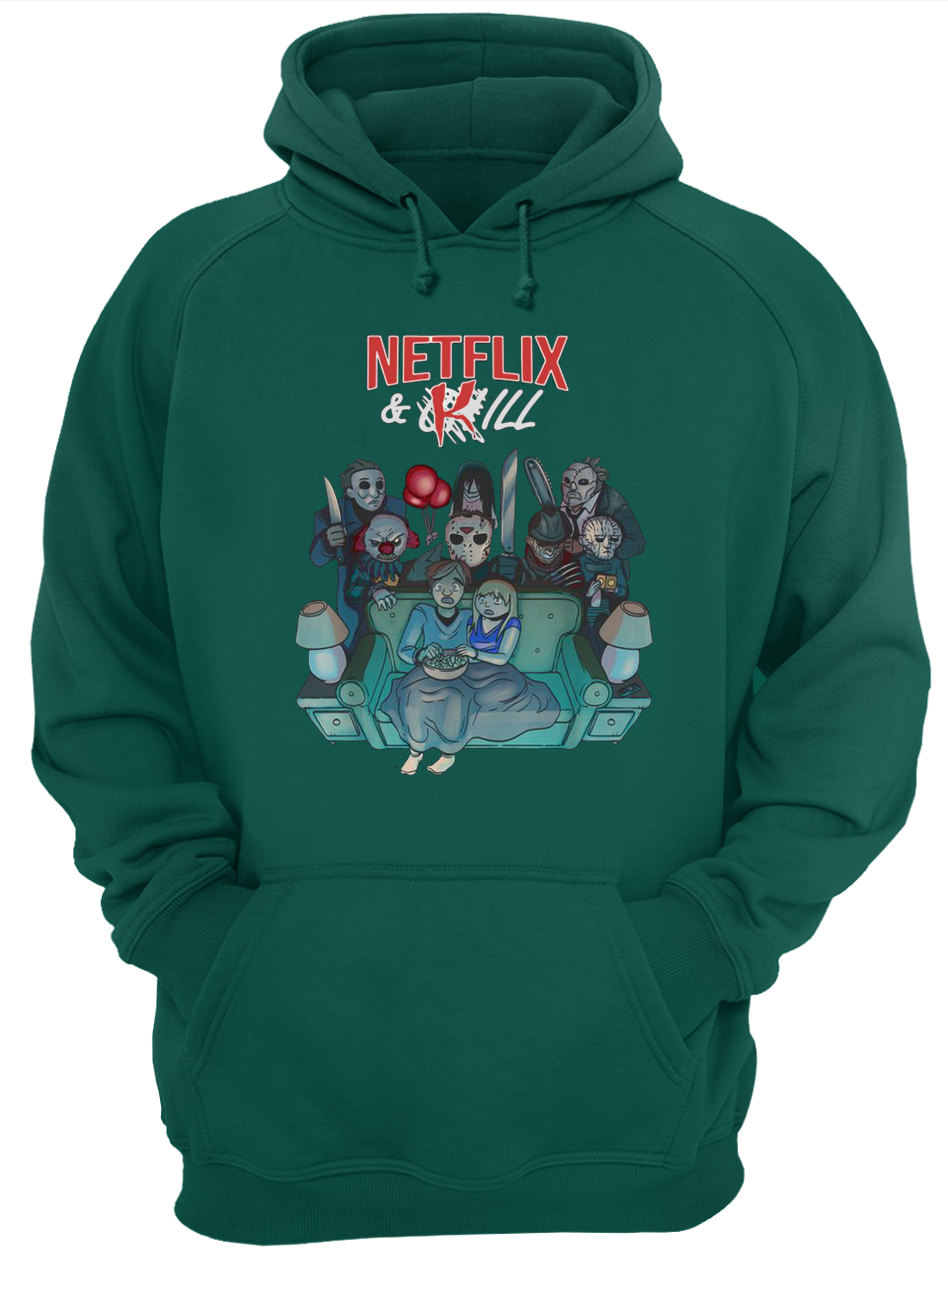 Horror movie characters netflix and kill hoodie